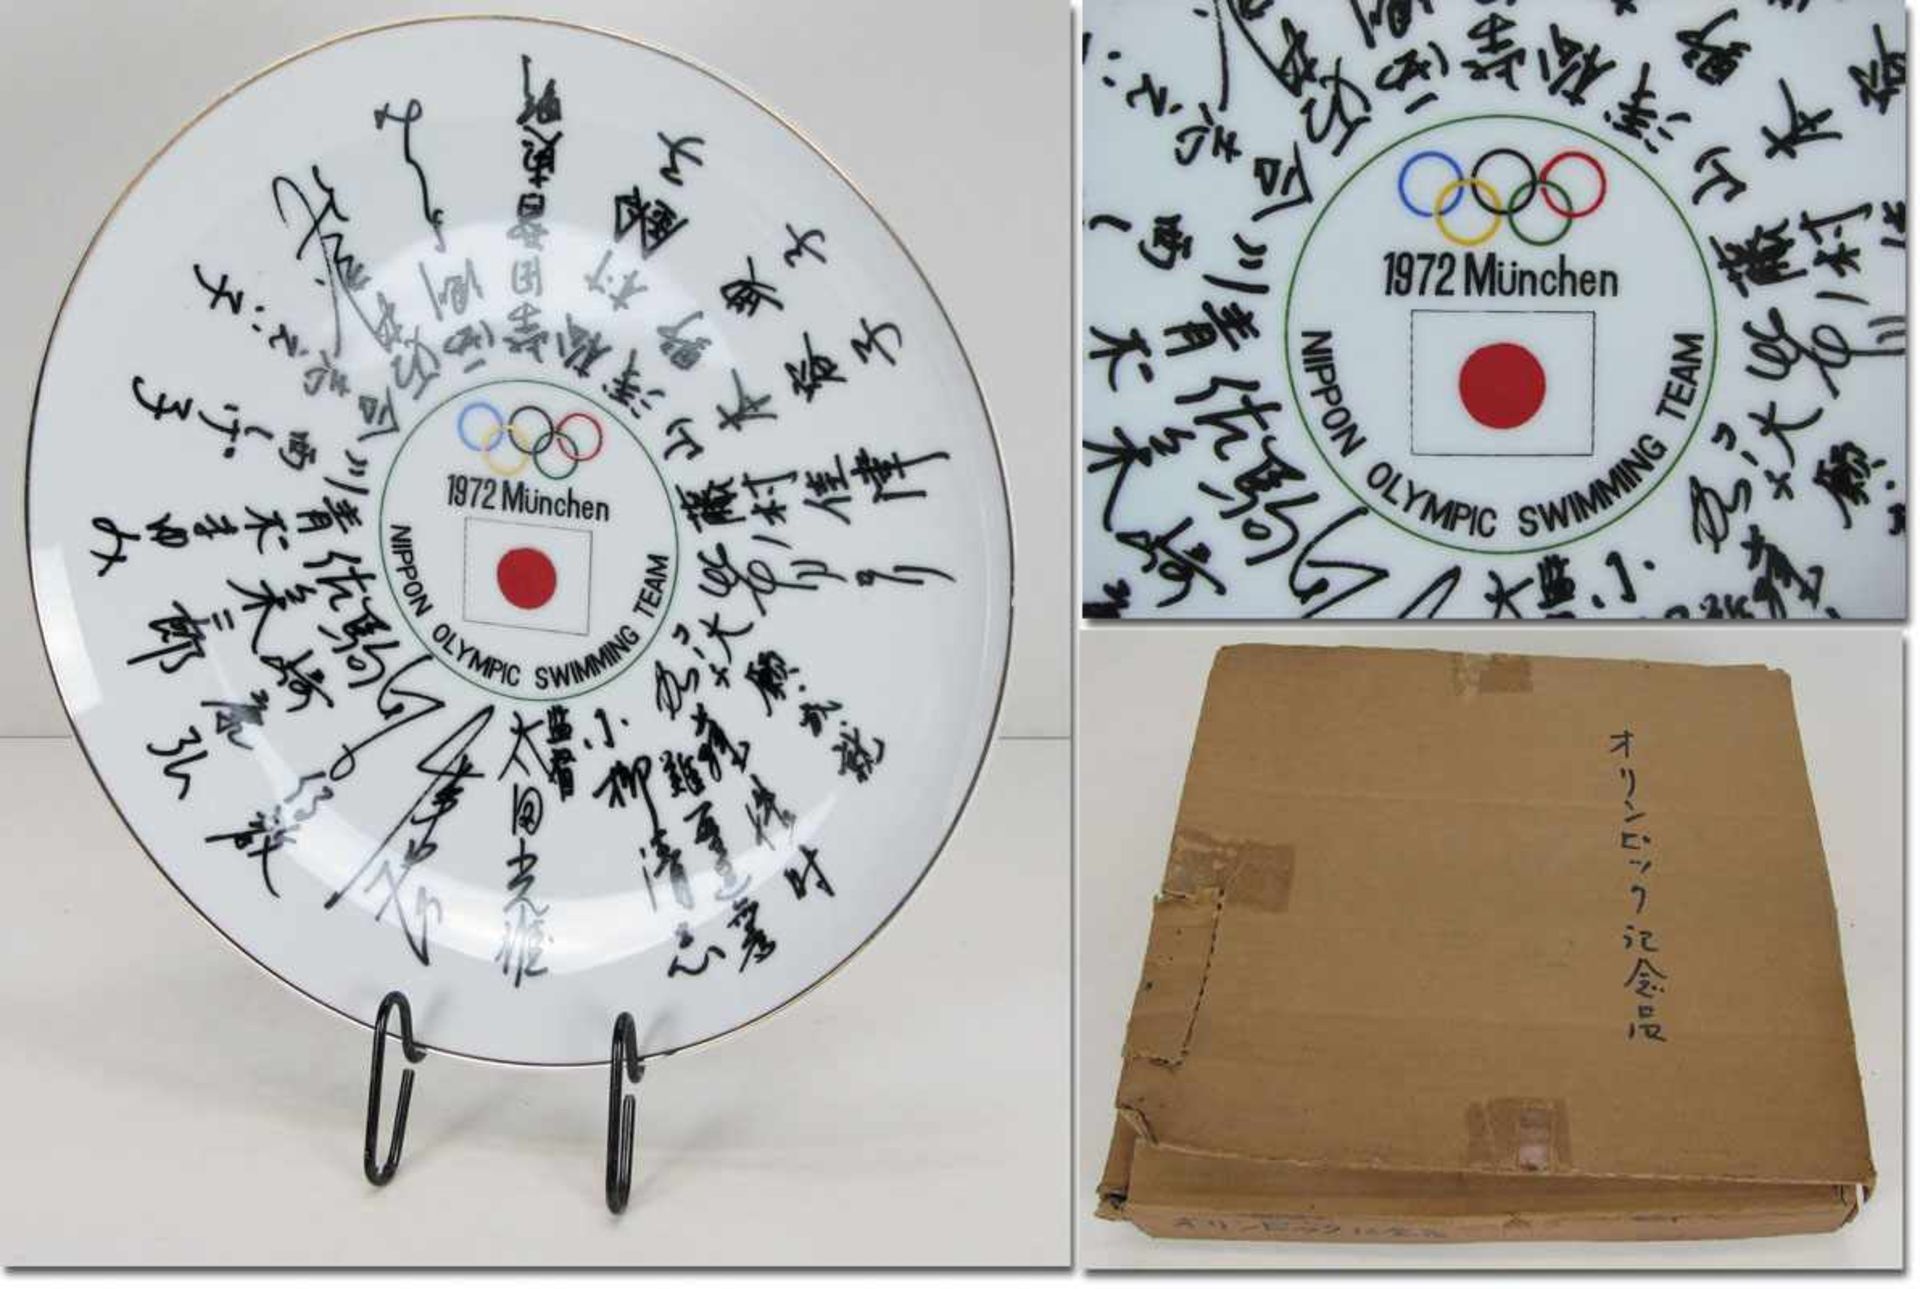 Olympic Games 1972 Porcelain Plate Japan - Offiical china plate of the Japanese swimming team at the